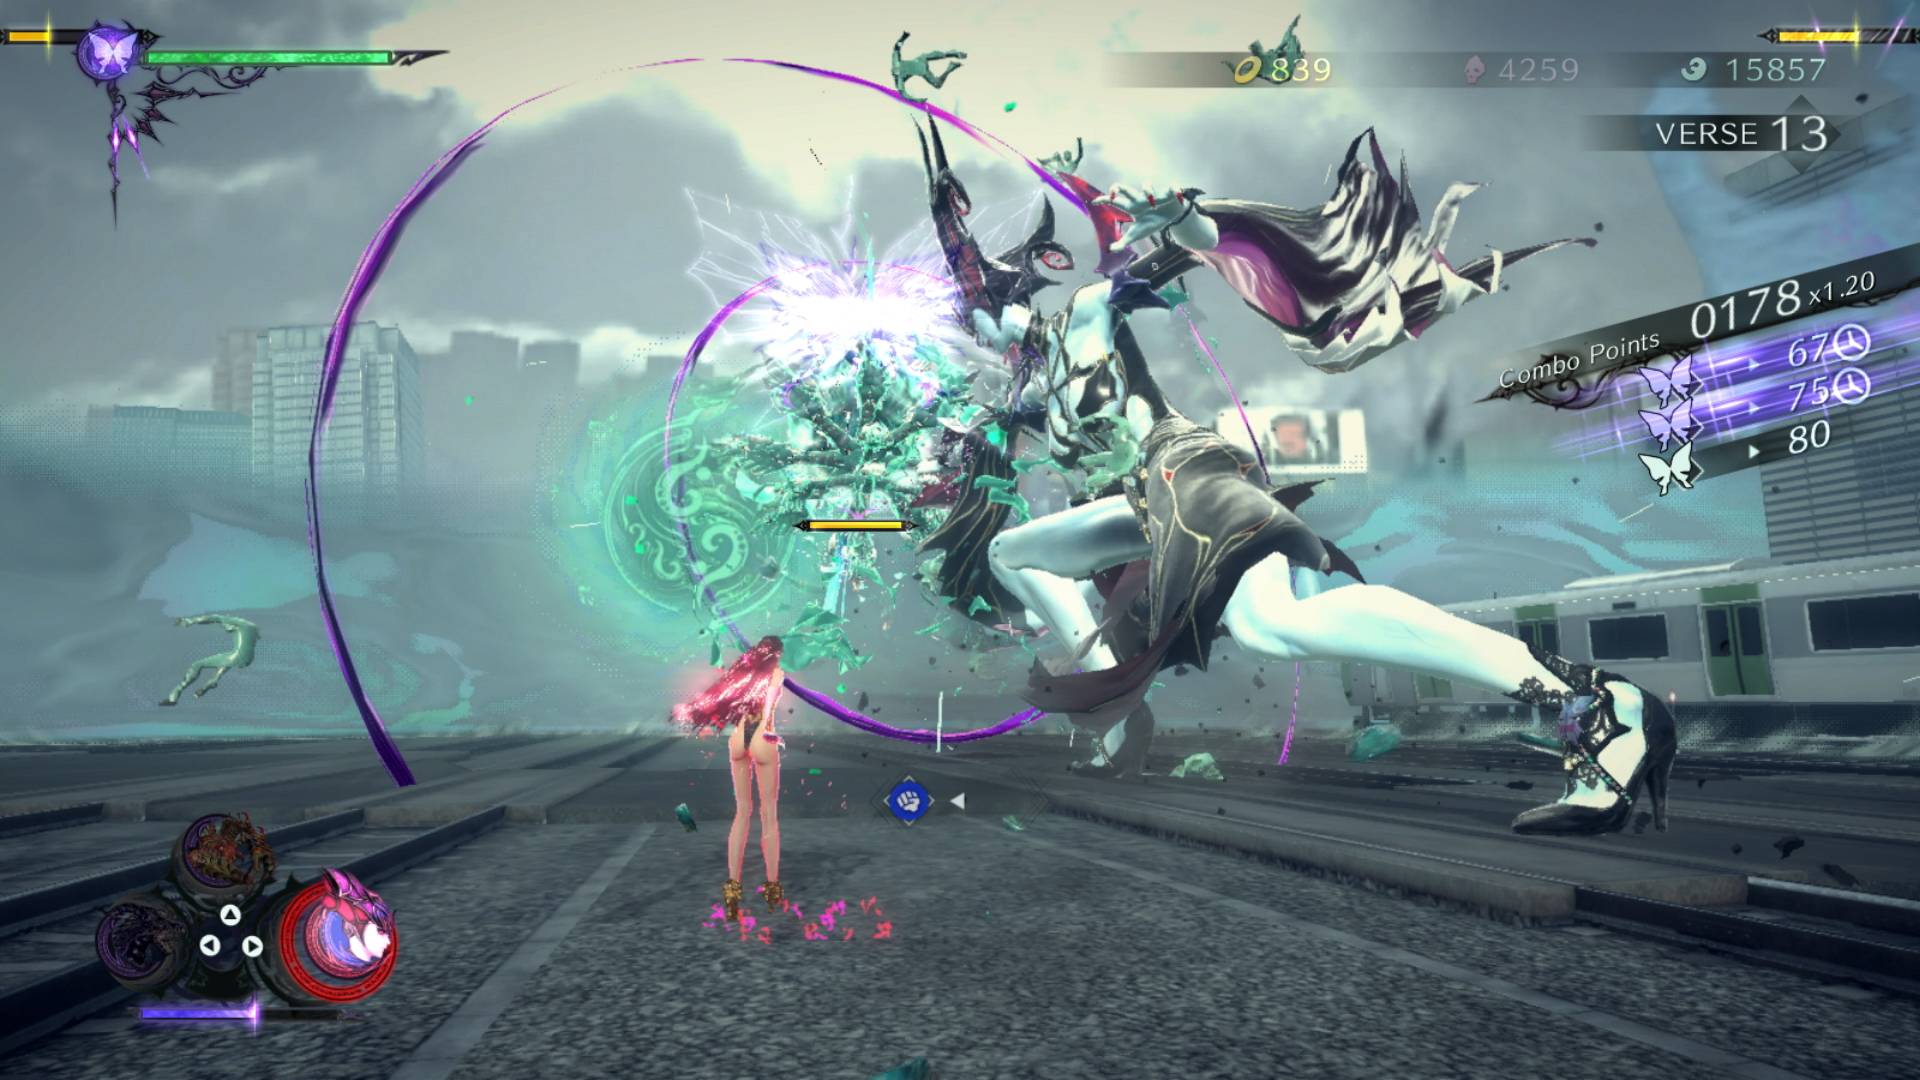 Stylish Hack-and-Slash Soulstice Gets New Trailer and Gameplay